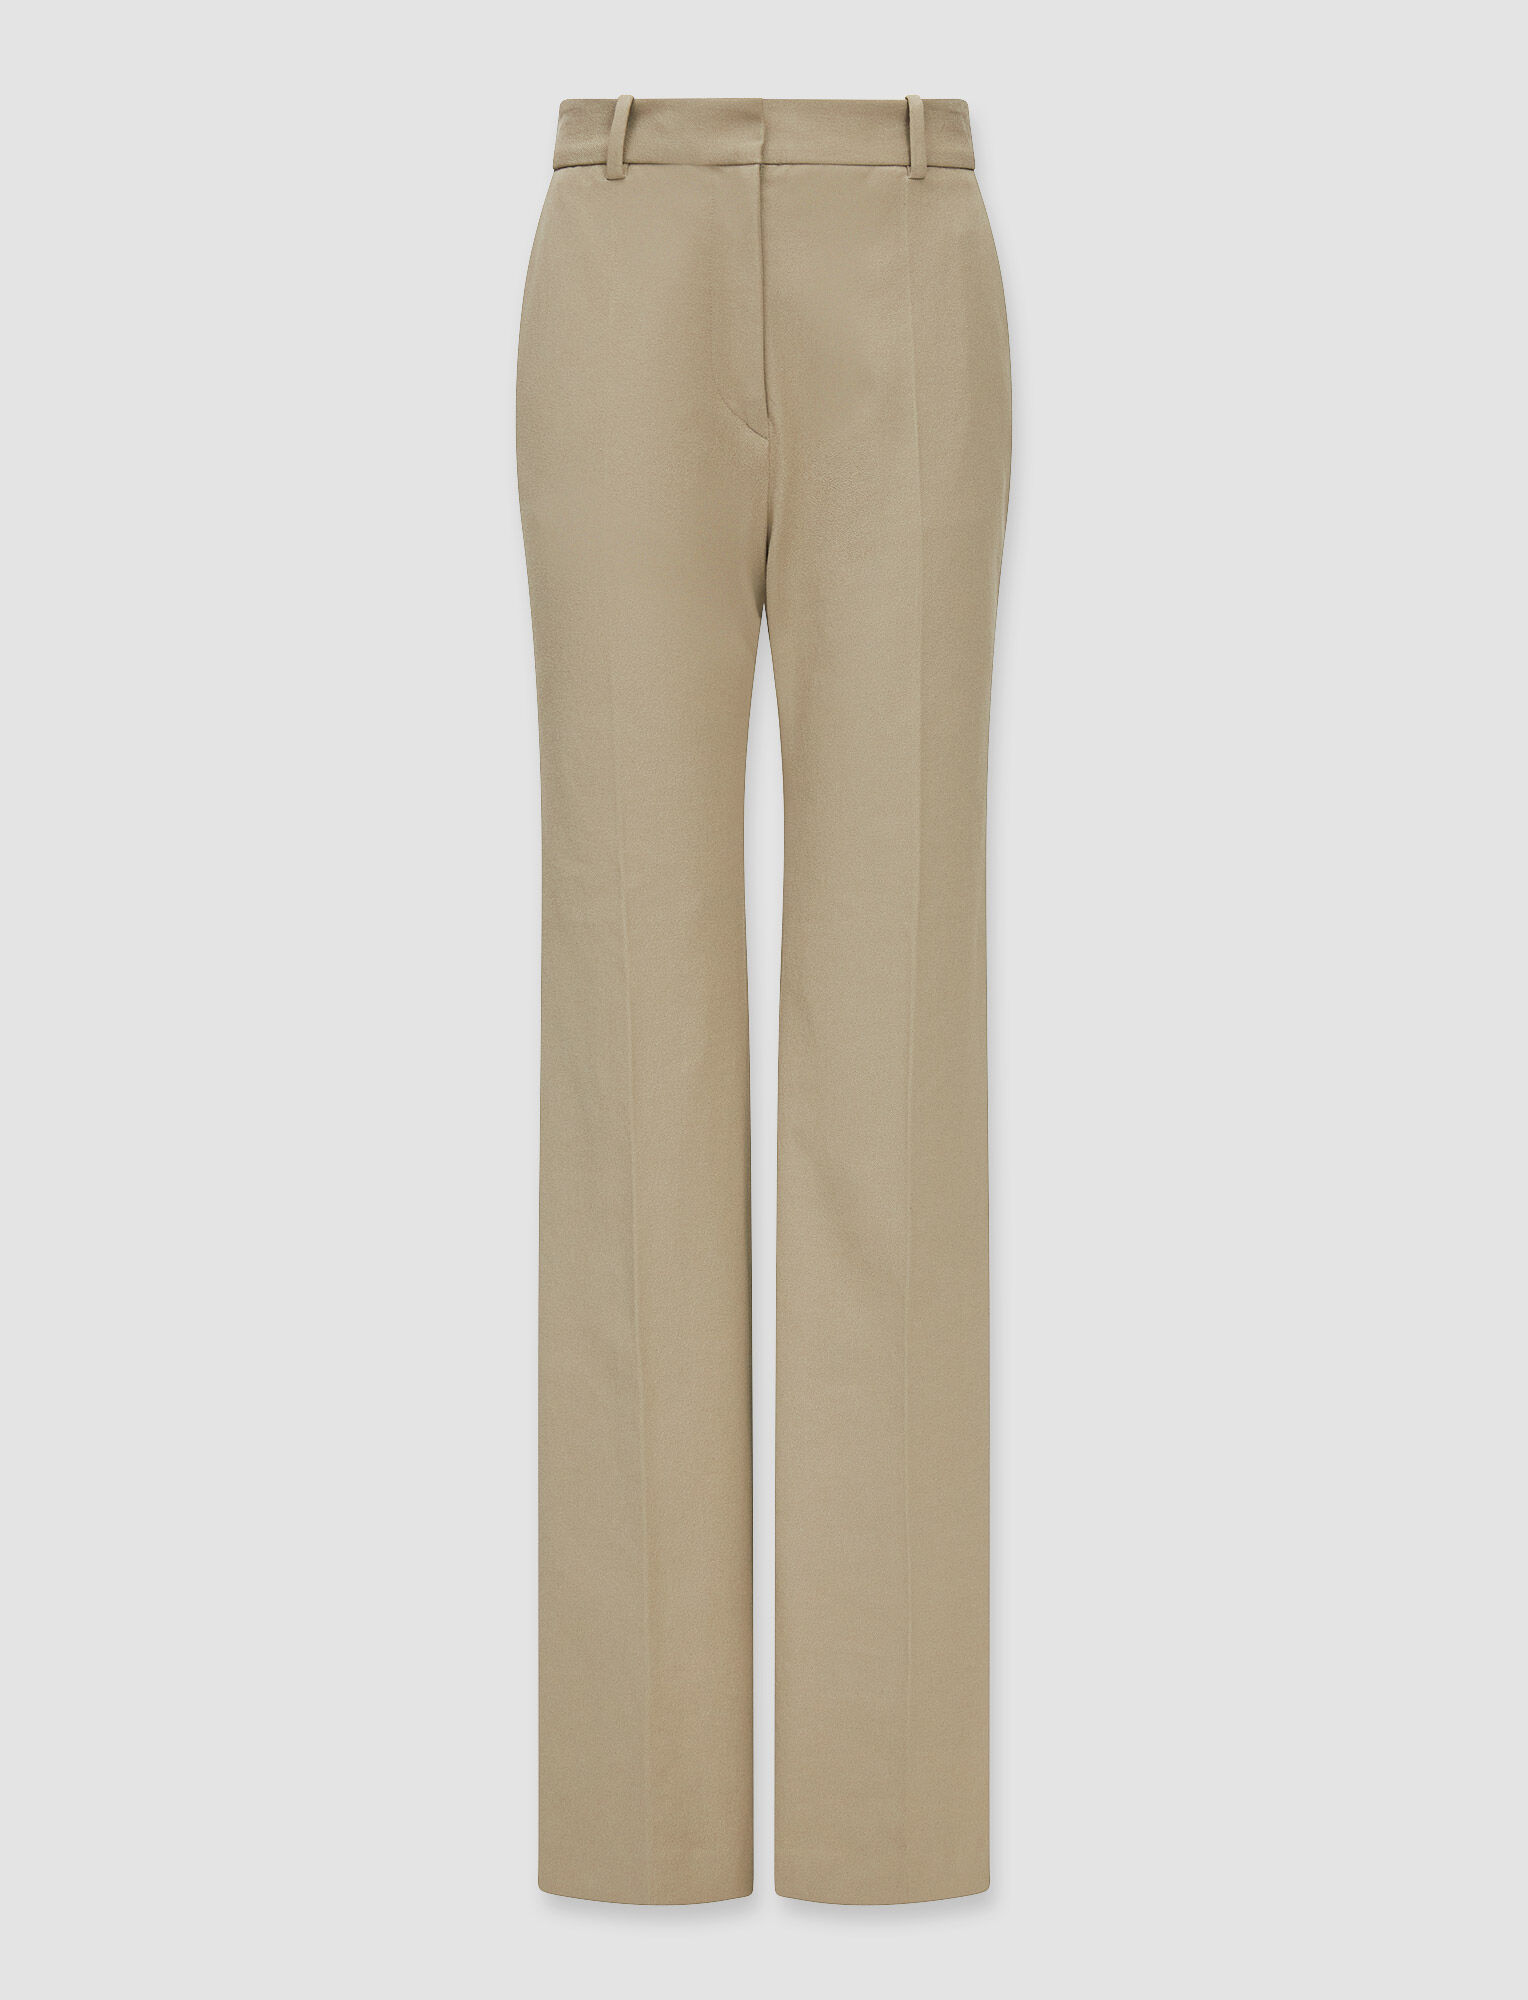 Jaeger Mens Trousers W 36 in Tan 100 Cotton